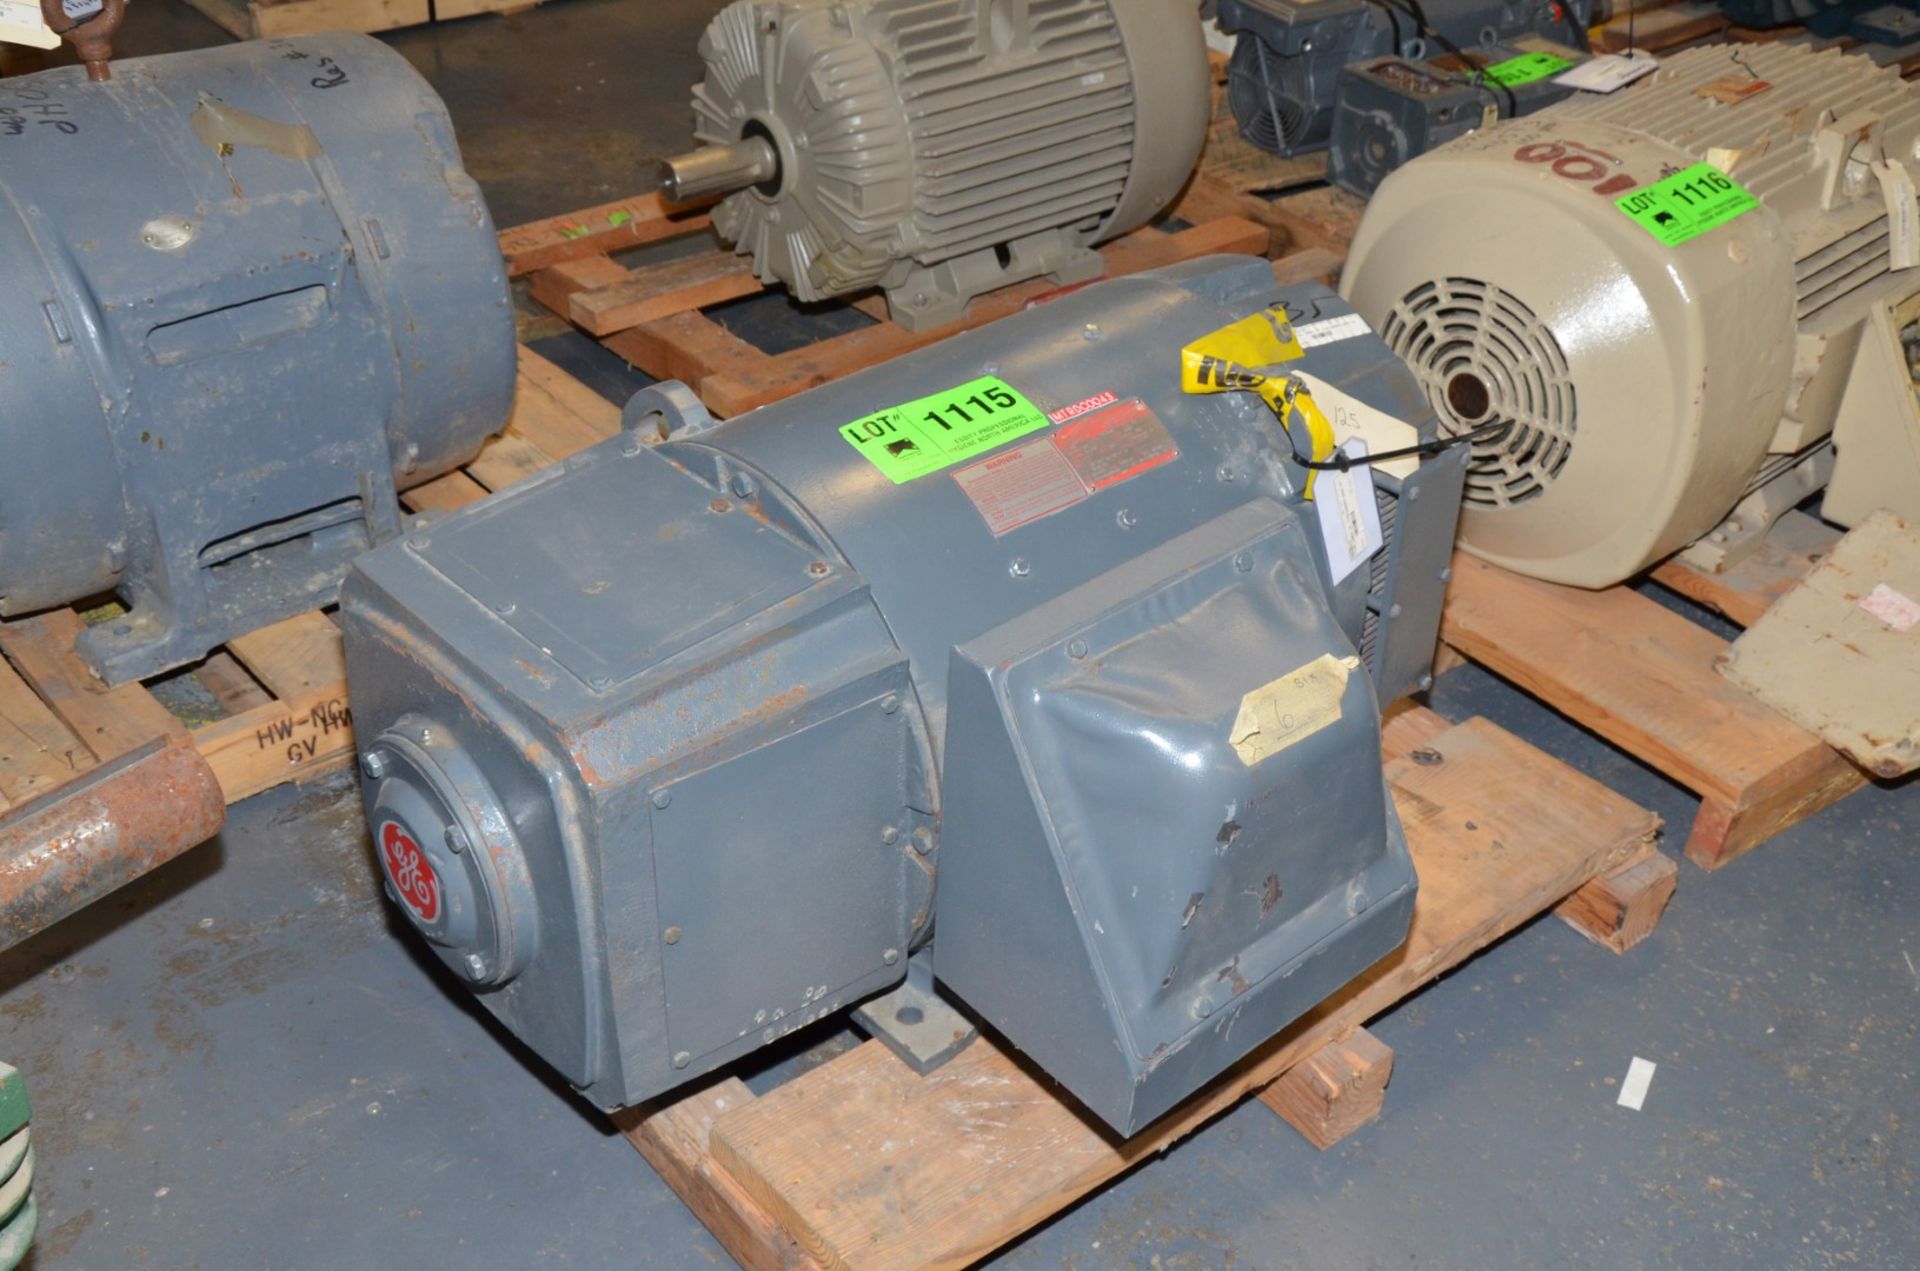 GE 200 HP 500V 2000 RPM ELECTRIC MOTOR [RIGGING FEE FOR LOT #1115 - $25 USD PLUS APPLICABLE TAXES]